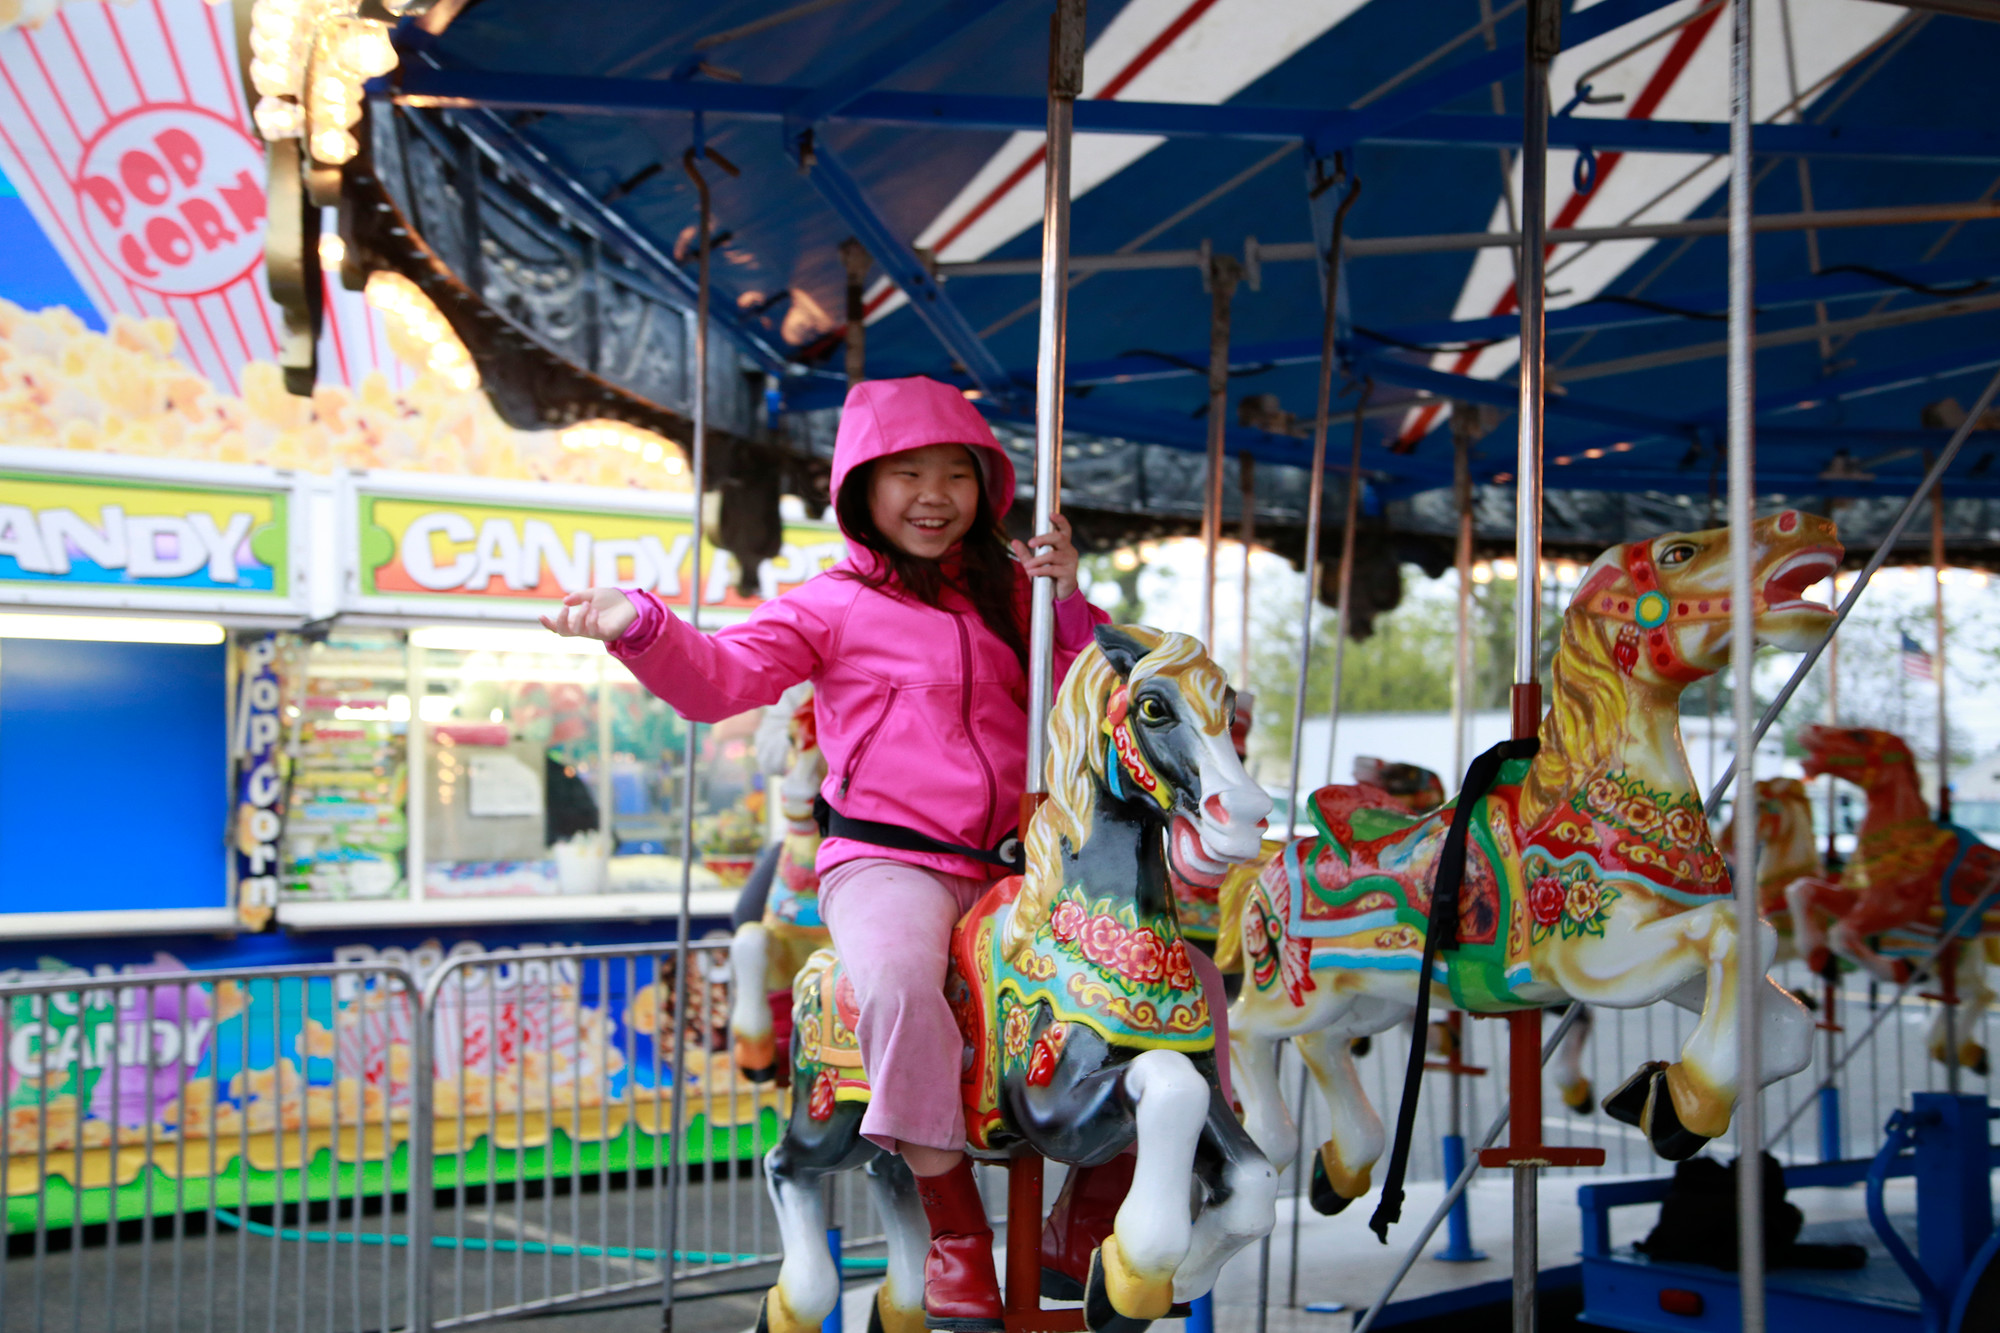 9-year-old Amanda Chou couldn’t help but smile as she rode the carousel.